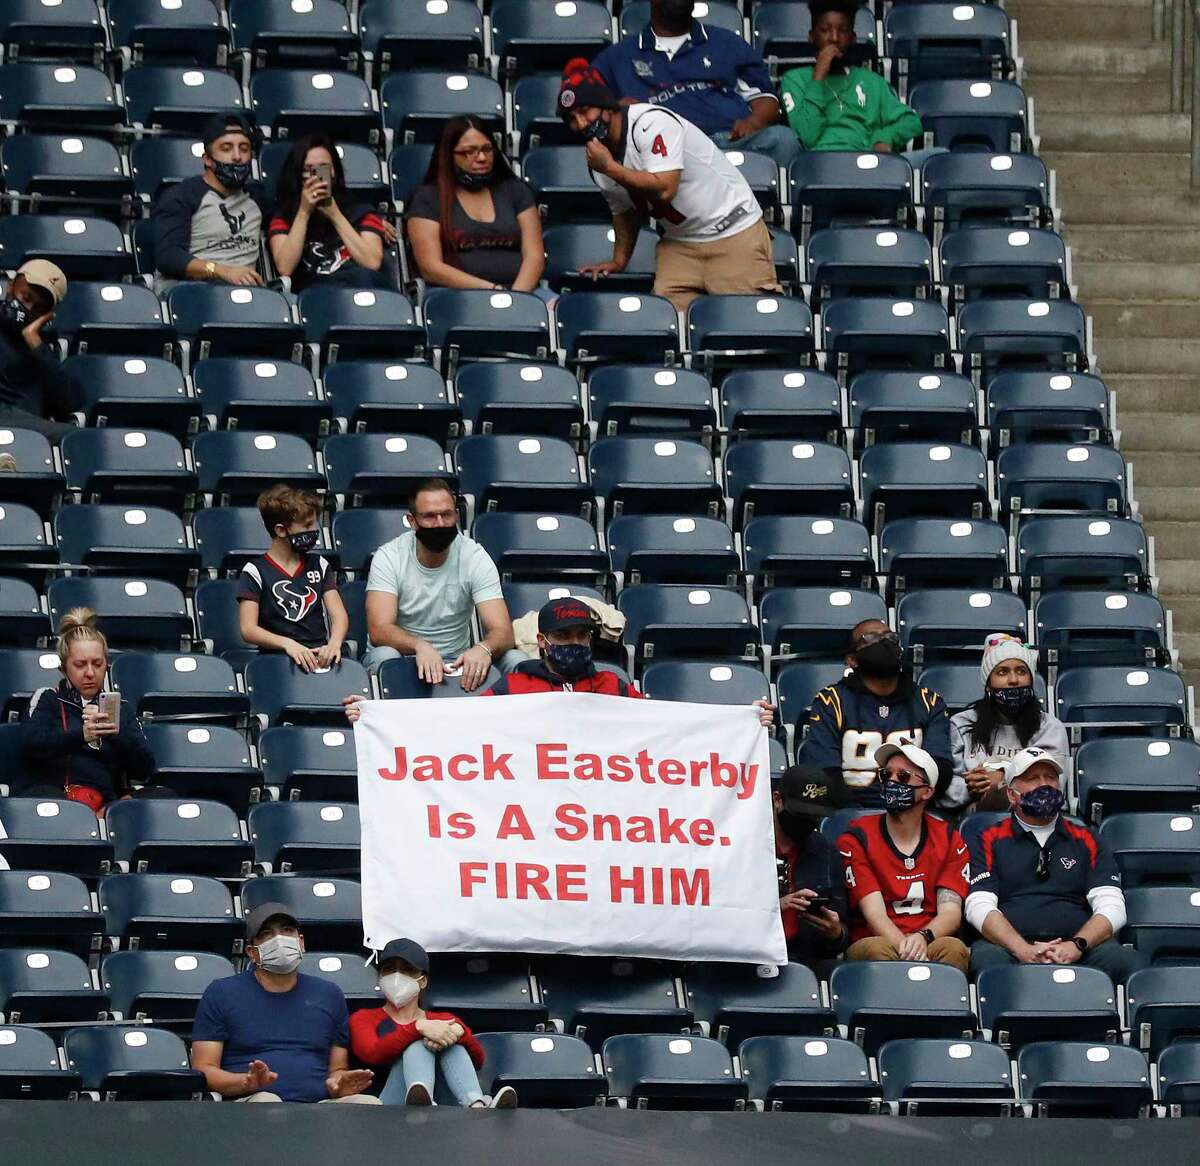 Ronnie Baker holds up his sign that reads "Jack Easterby is a snake. Fire Him" in the stands during the fourth quarter of an NFL football game at NRG Stadium, Sunday, December 27, 2020, in Houston.